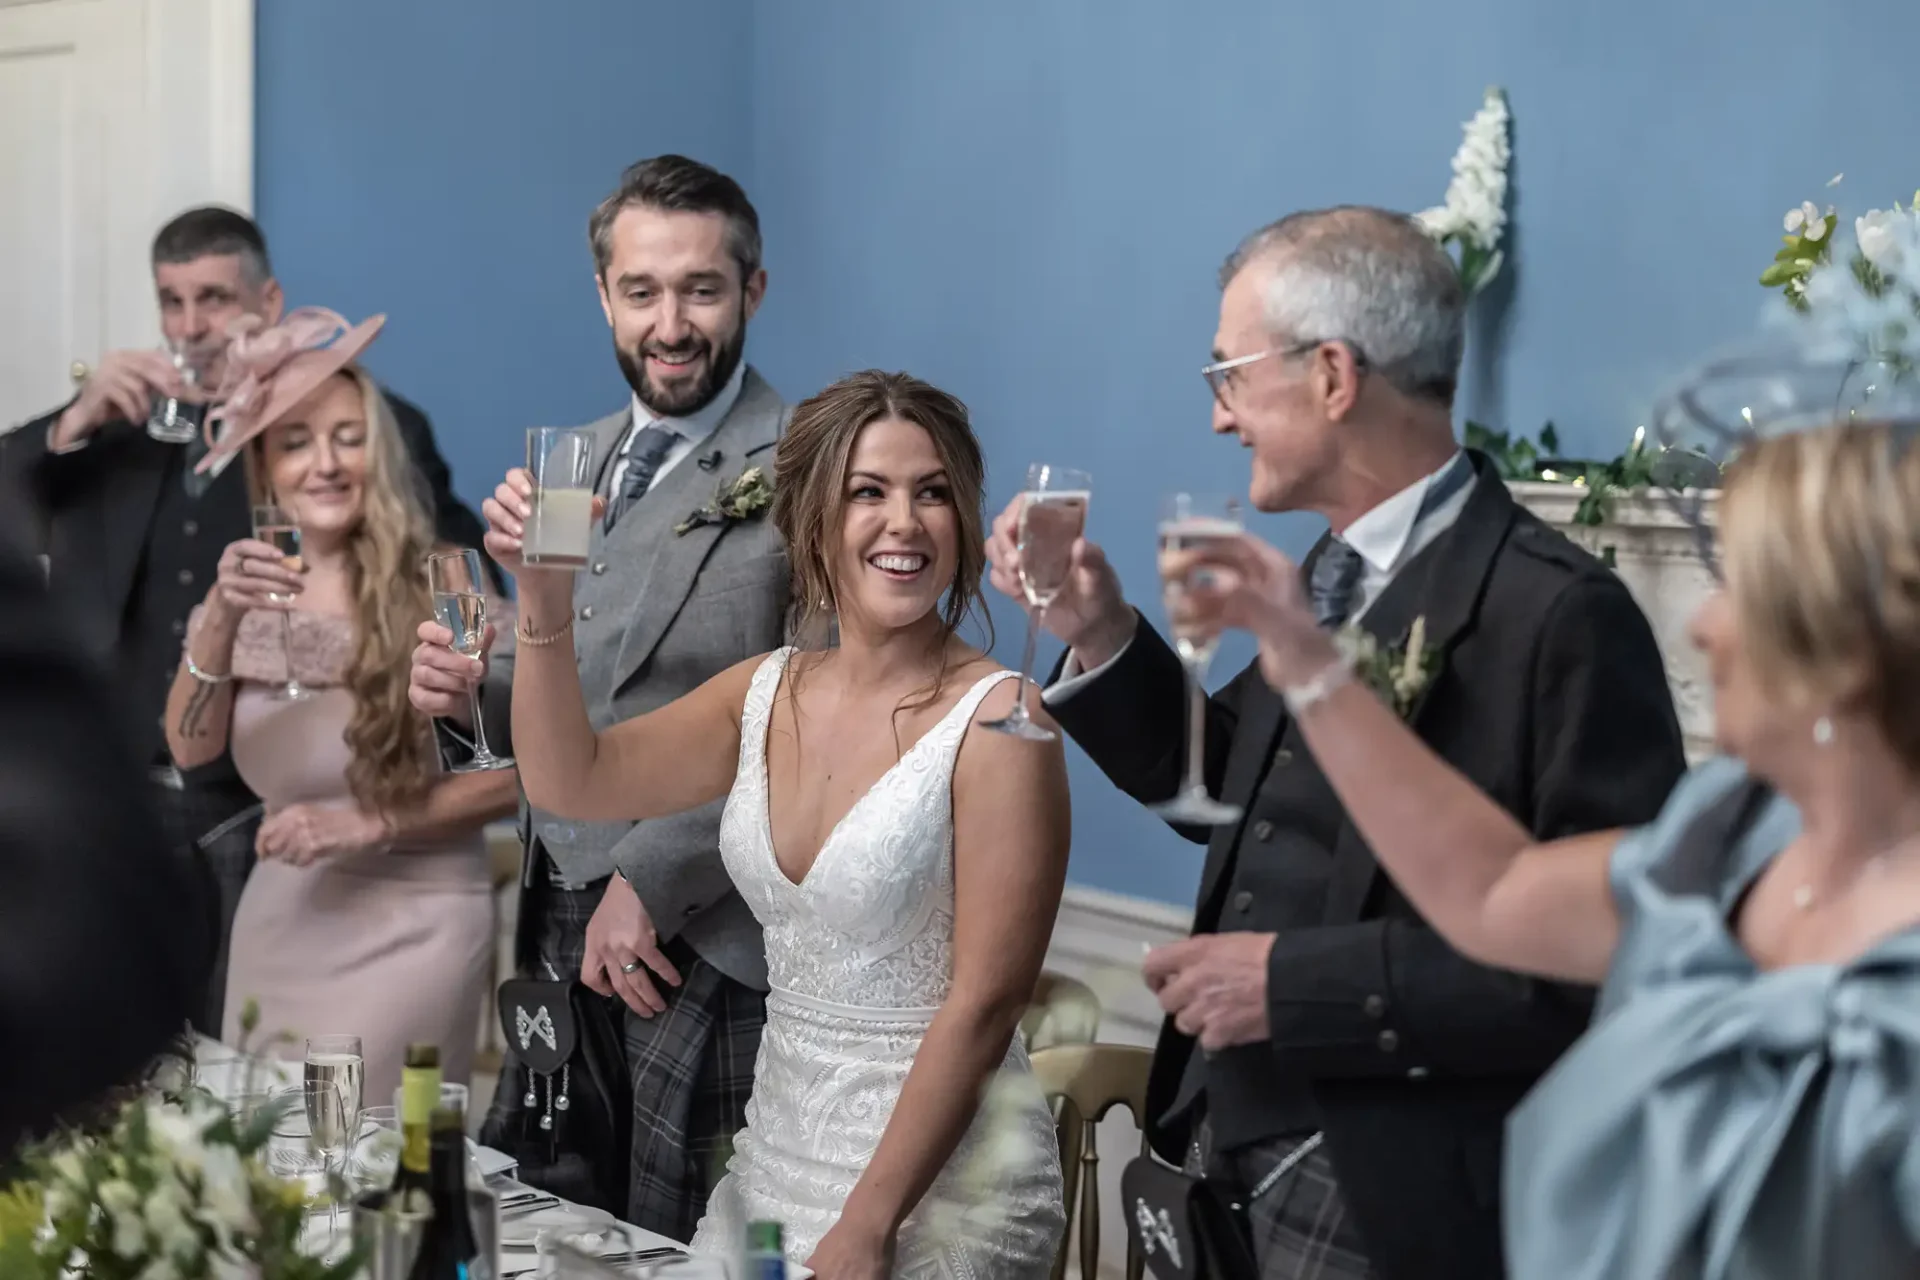 A bride and groom cheerfully toast with guests at their wedding reception, surrounded by smiling friends and family.